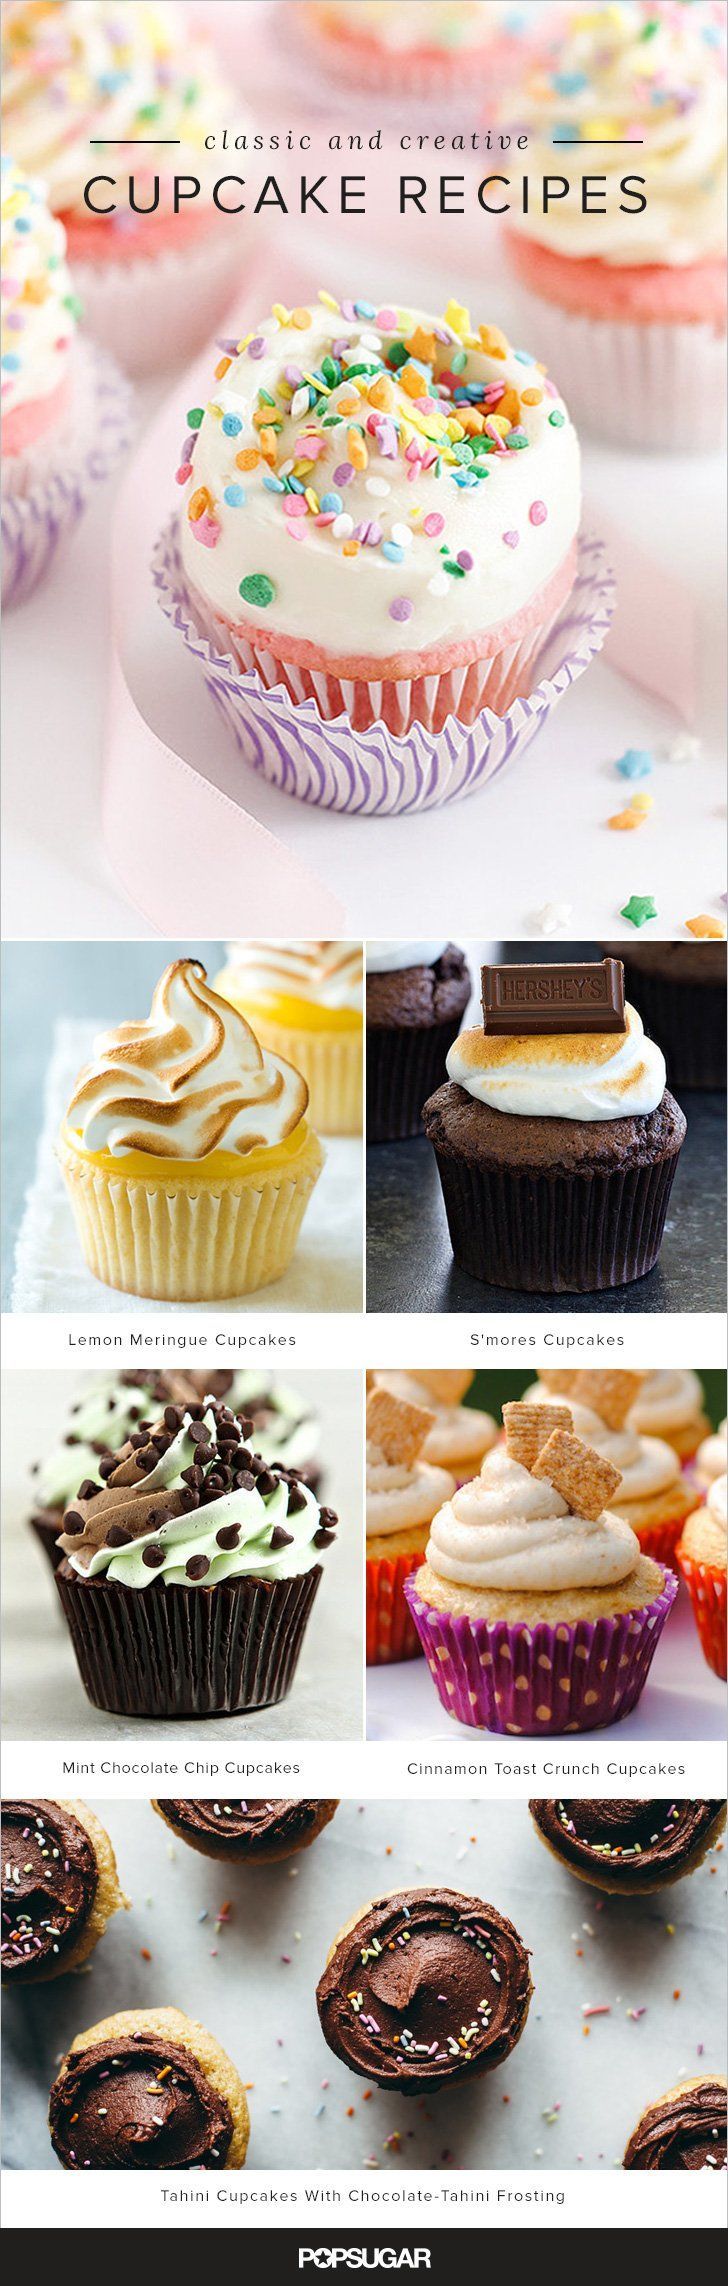 50 cupcake recipes, because sometimes more is more!